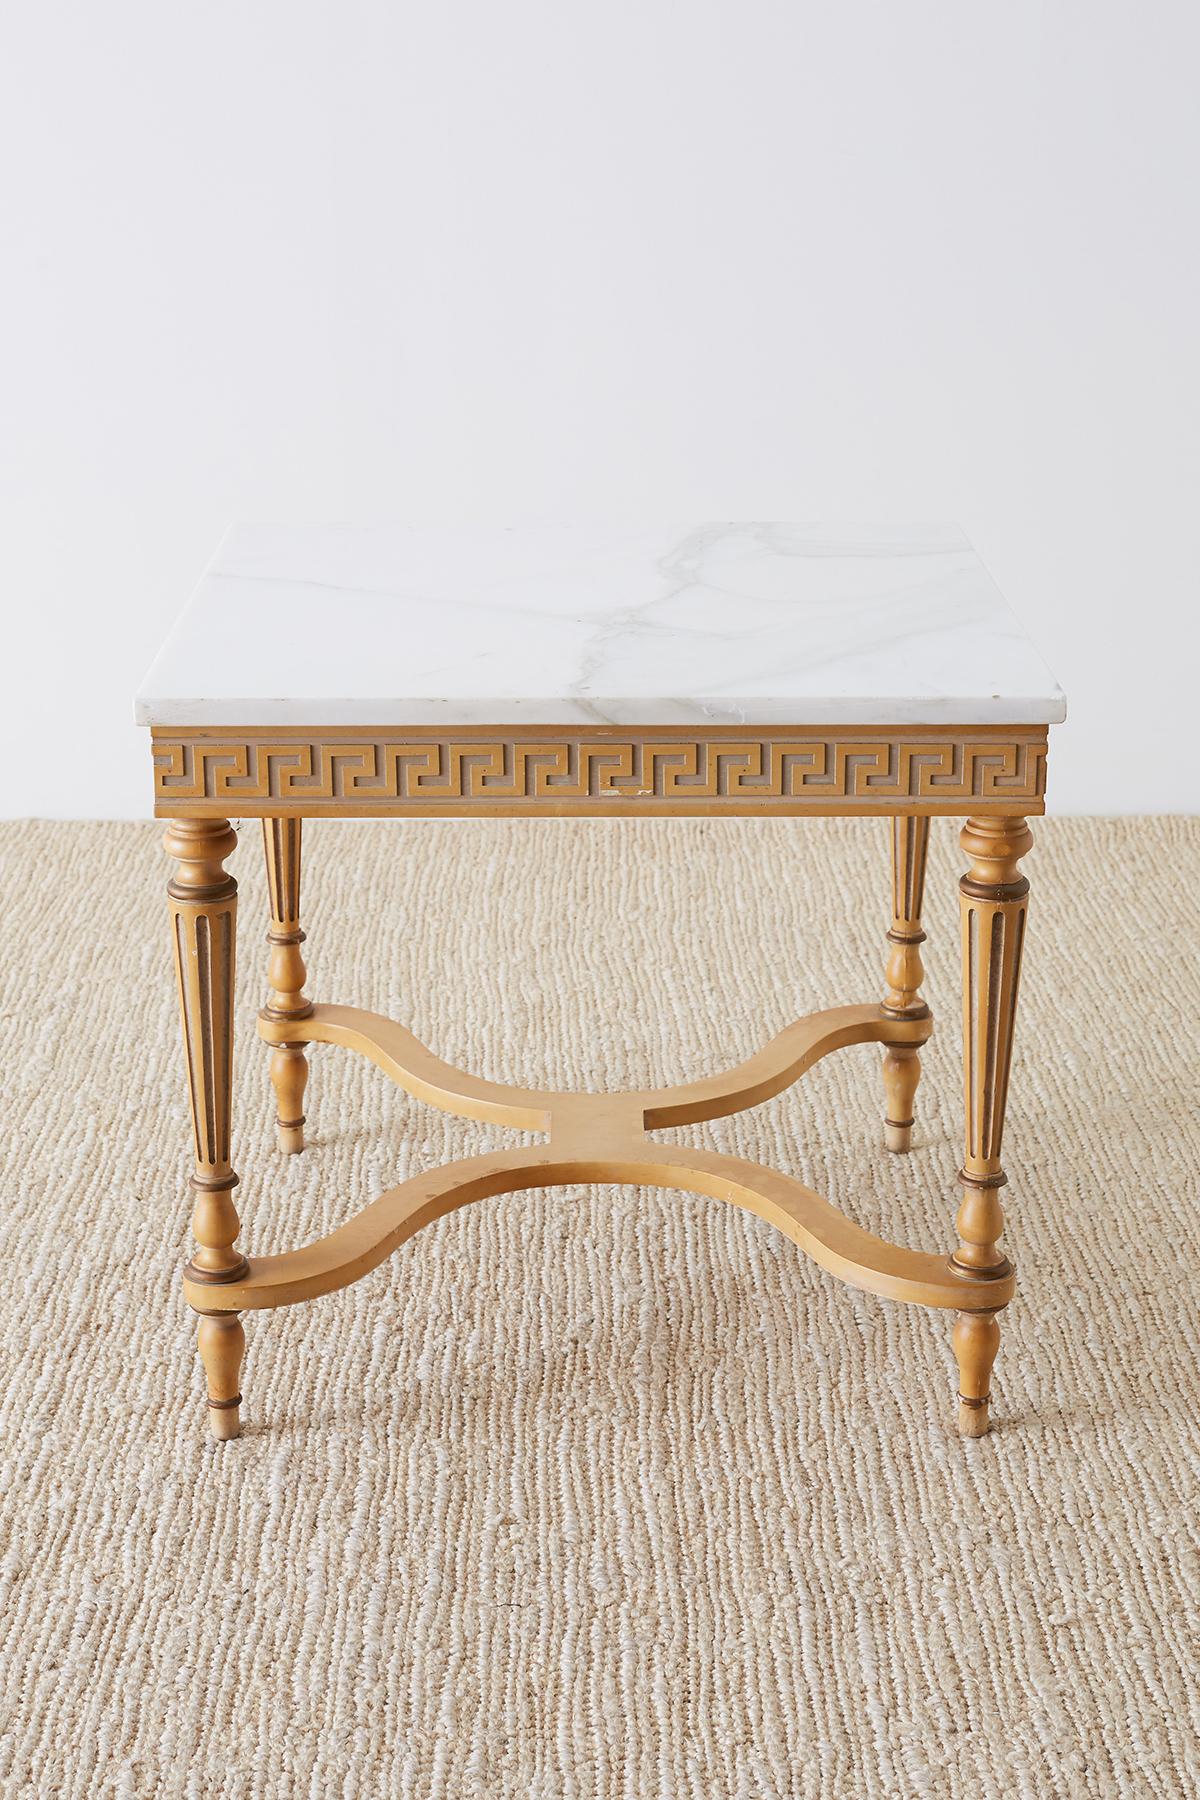 Mid-Century Modern Italian table featuring a 1 inch thick Carrara marble top. Square table made in the neoclassical taste with a decorative Greek key design veneer on the frieze. Supported by four fluted legs conjoined by a cross stretcher and